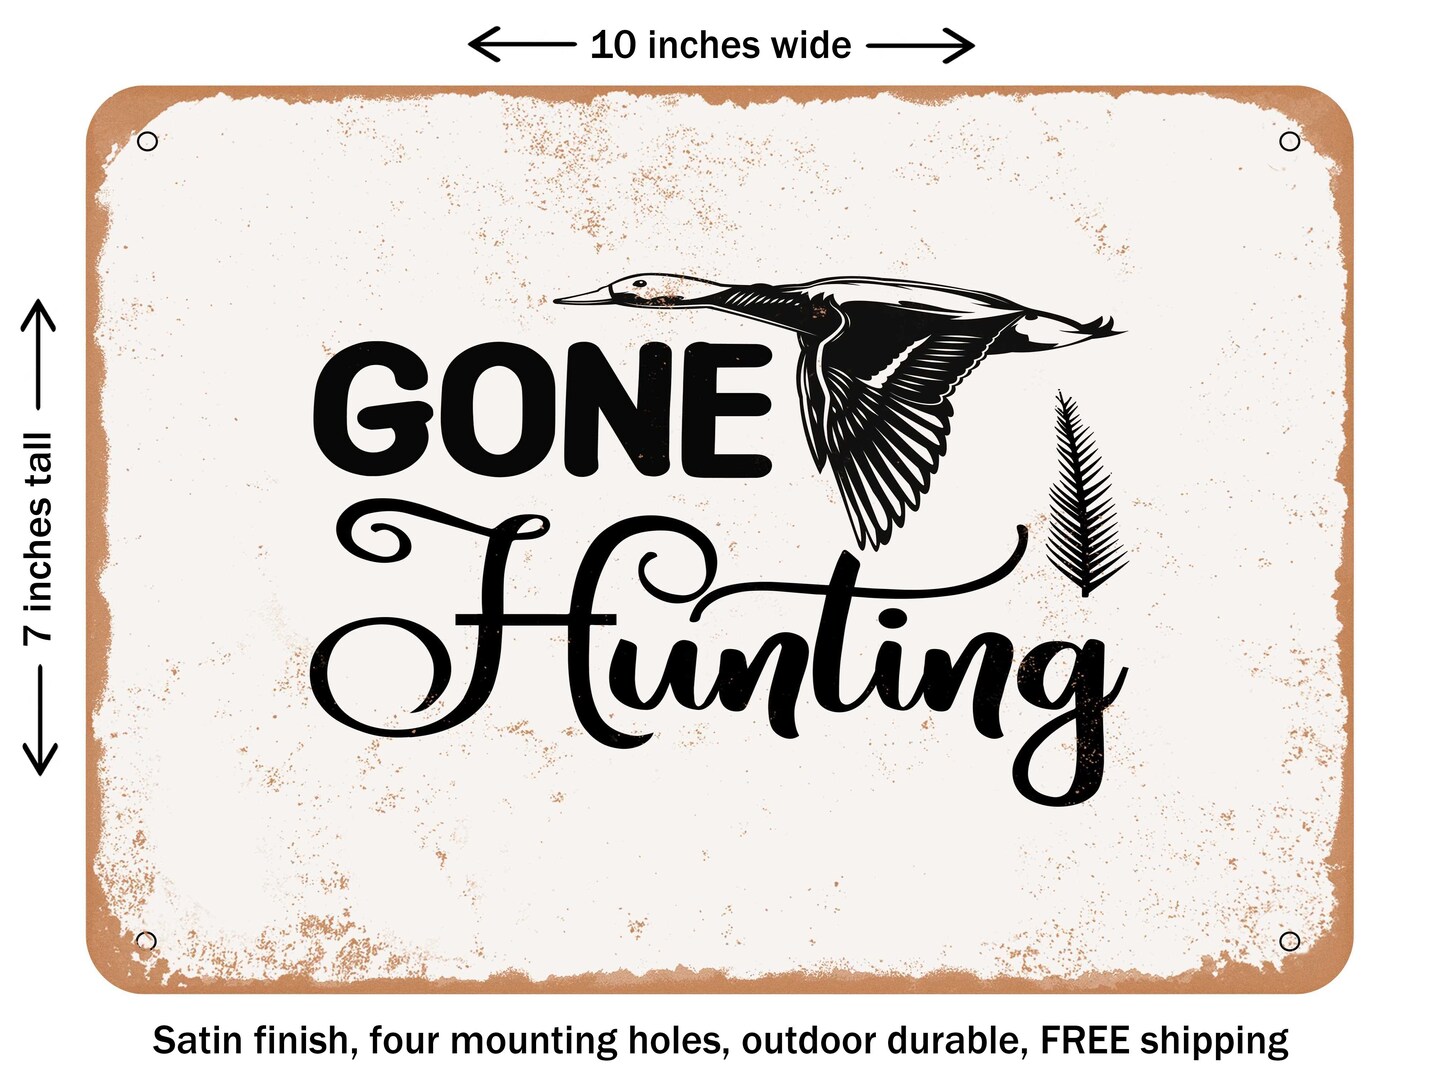 DECORATIVE METAL SIGN - Gone Hunting - Vintage Rusty Look